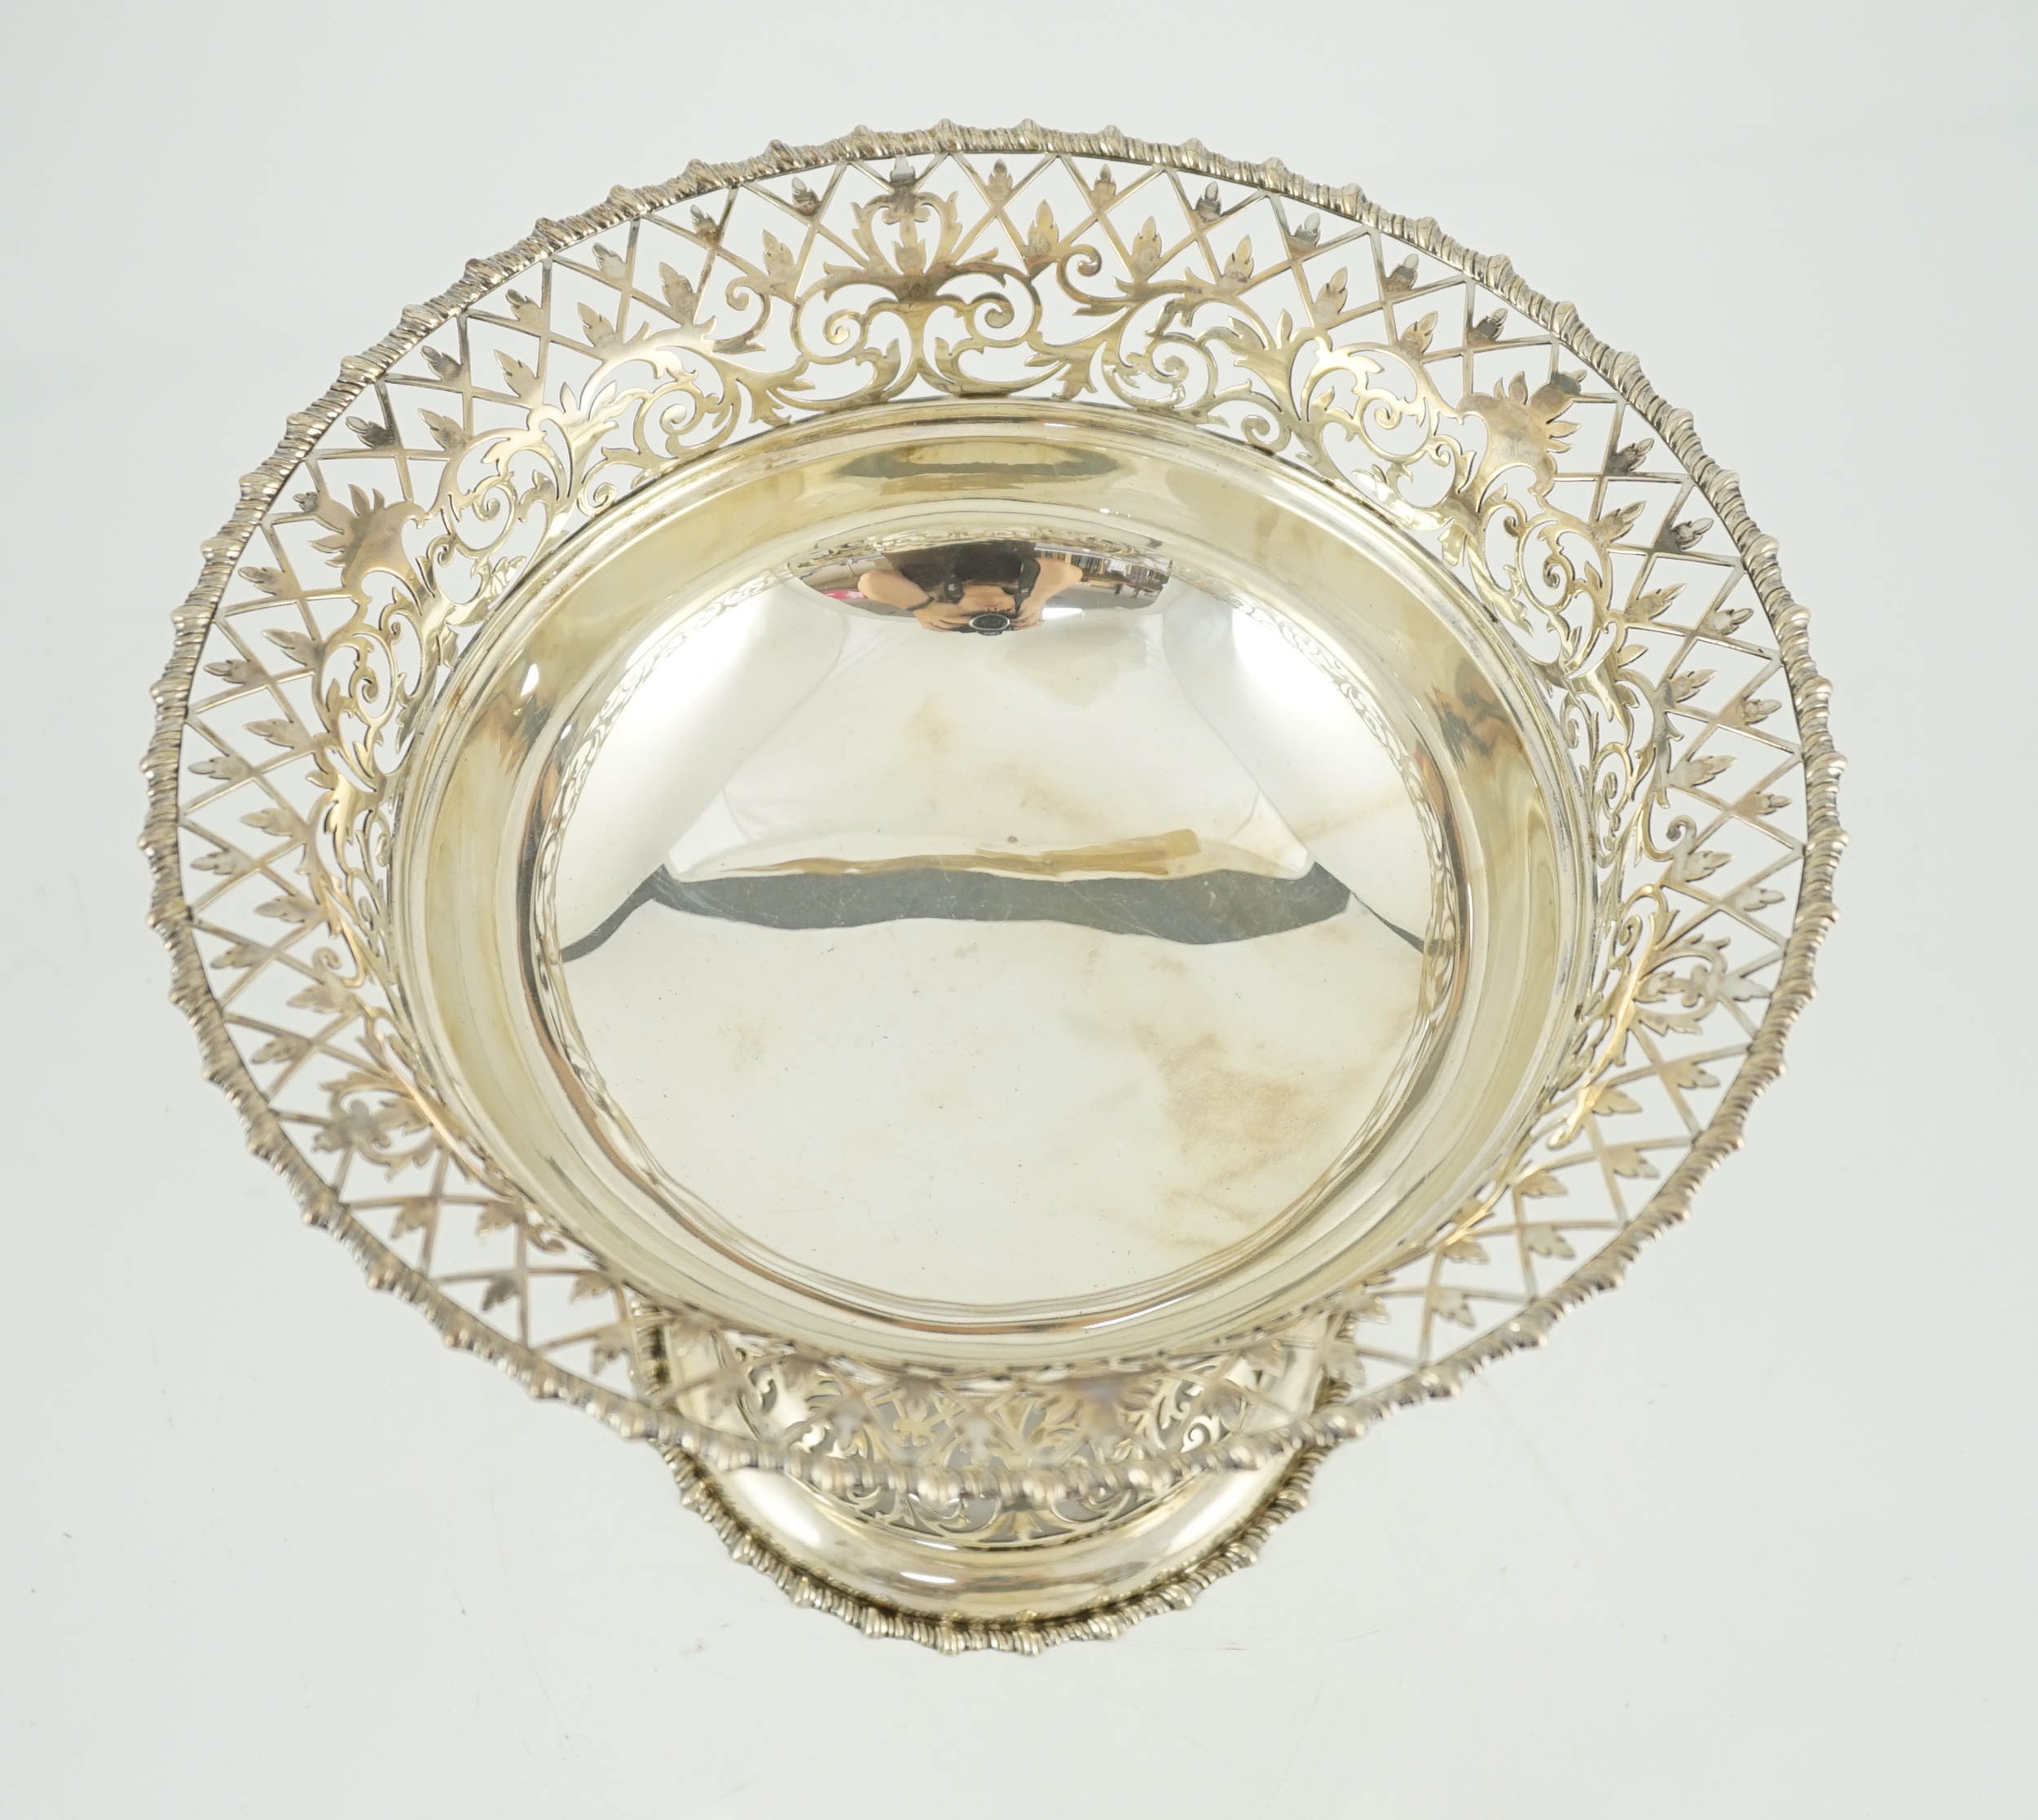 An Edwardian silver pedestal fruit bowl, with pierced border and pierced circular foot, by James - Image 3 of 4